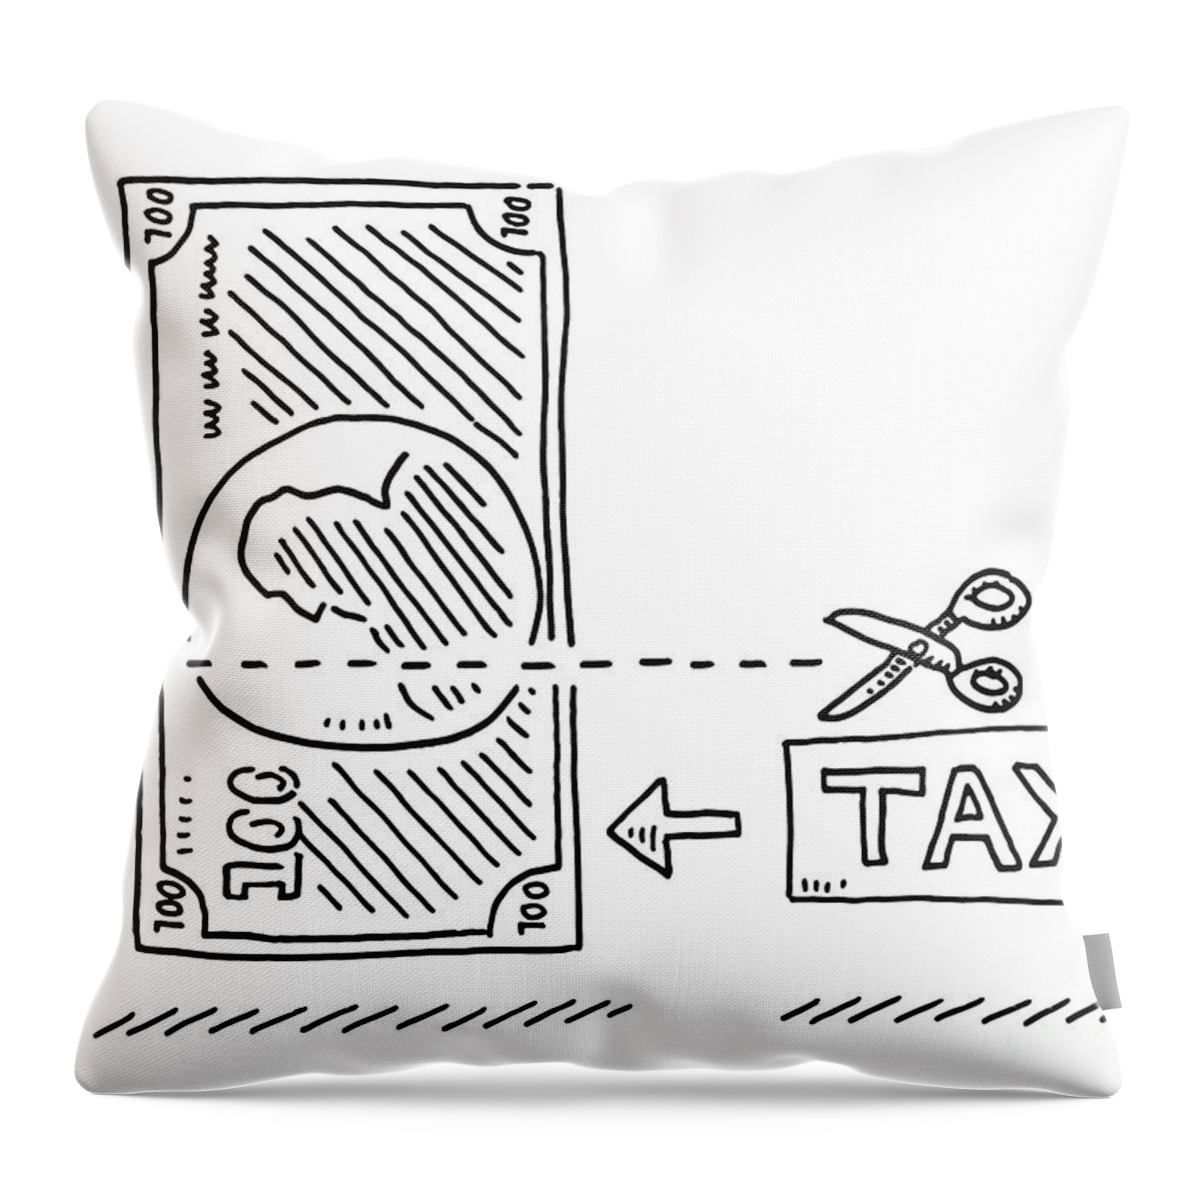 Sketch Throw Pillow featuring the drawing Banknote Tax Cut Scissors Symbol Drawing by Frank Ramspott